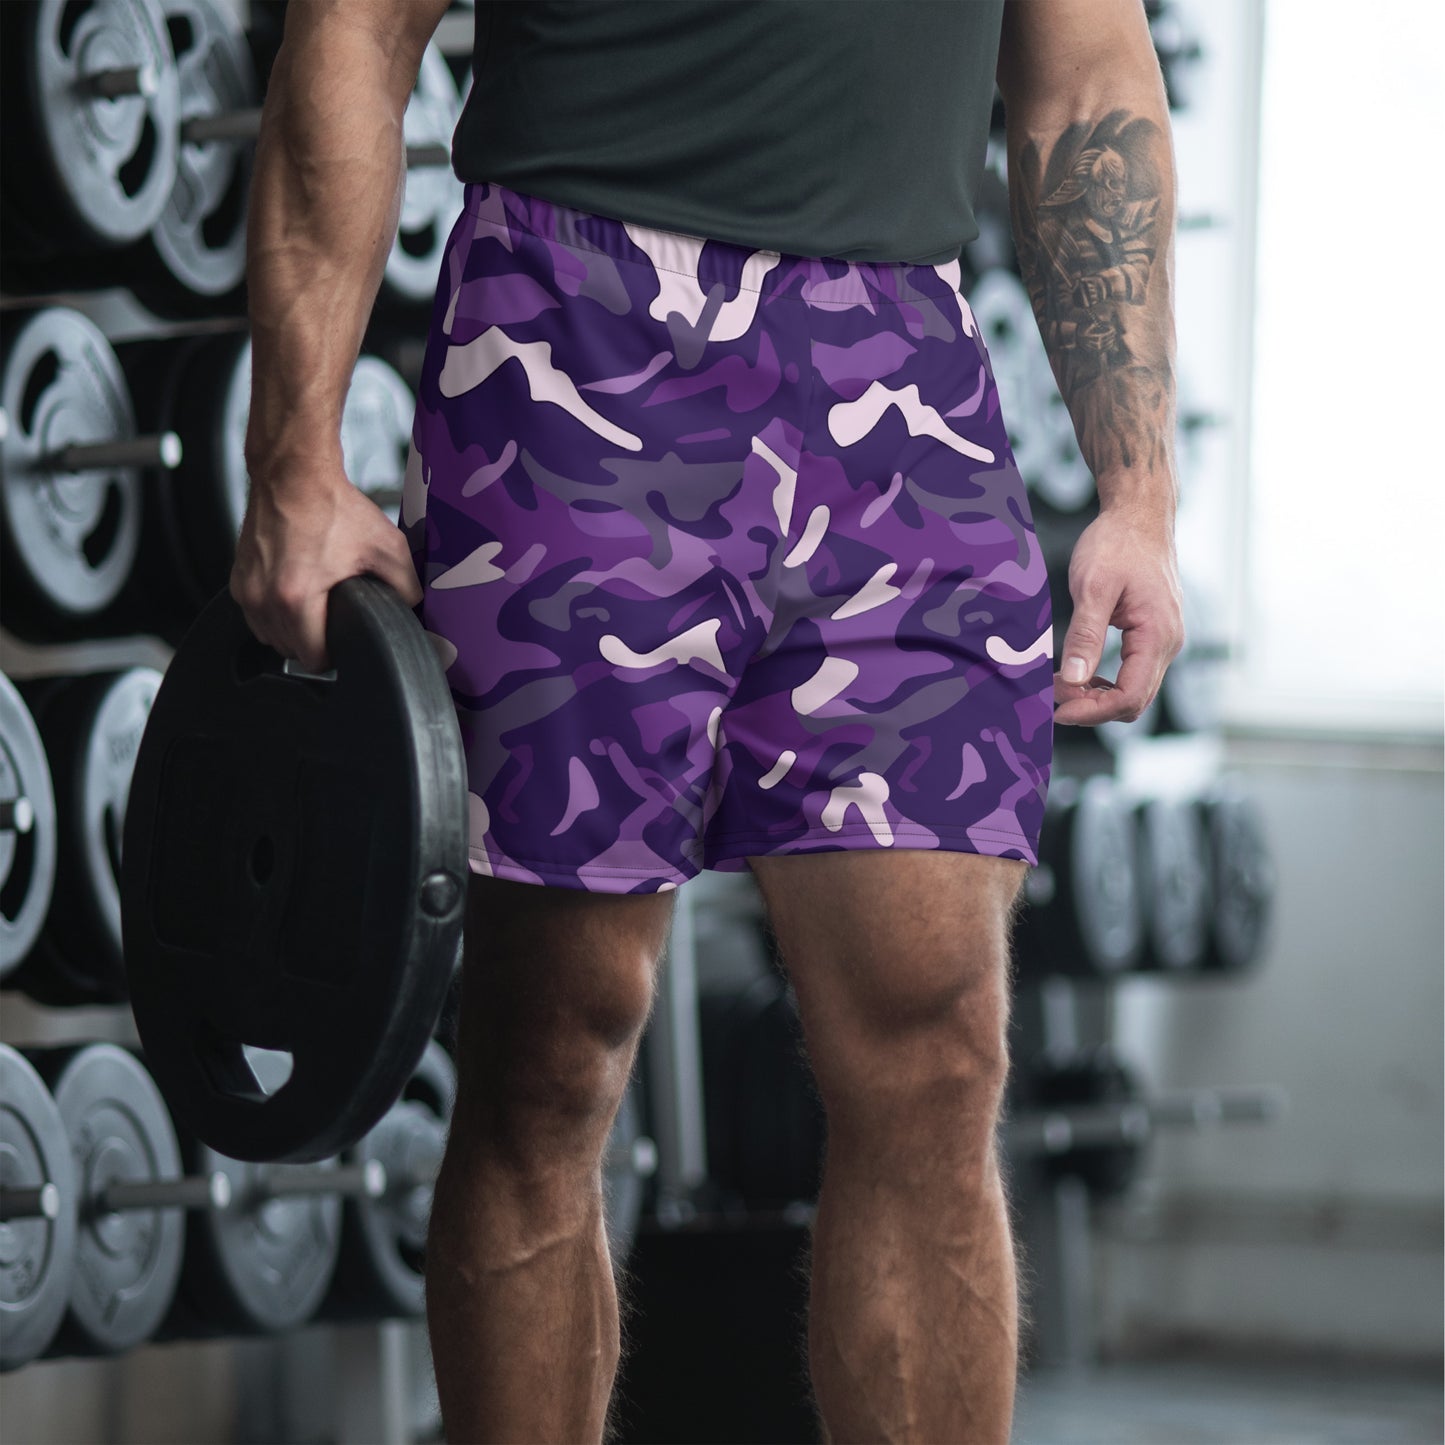 Camo Men Shorts, Purple Camouflage Gym Workout Eco Sports Swim Beach Pockets Running 6.5" Long Casual Summer Plus Size